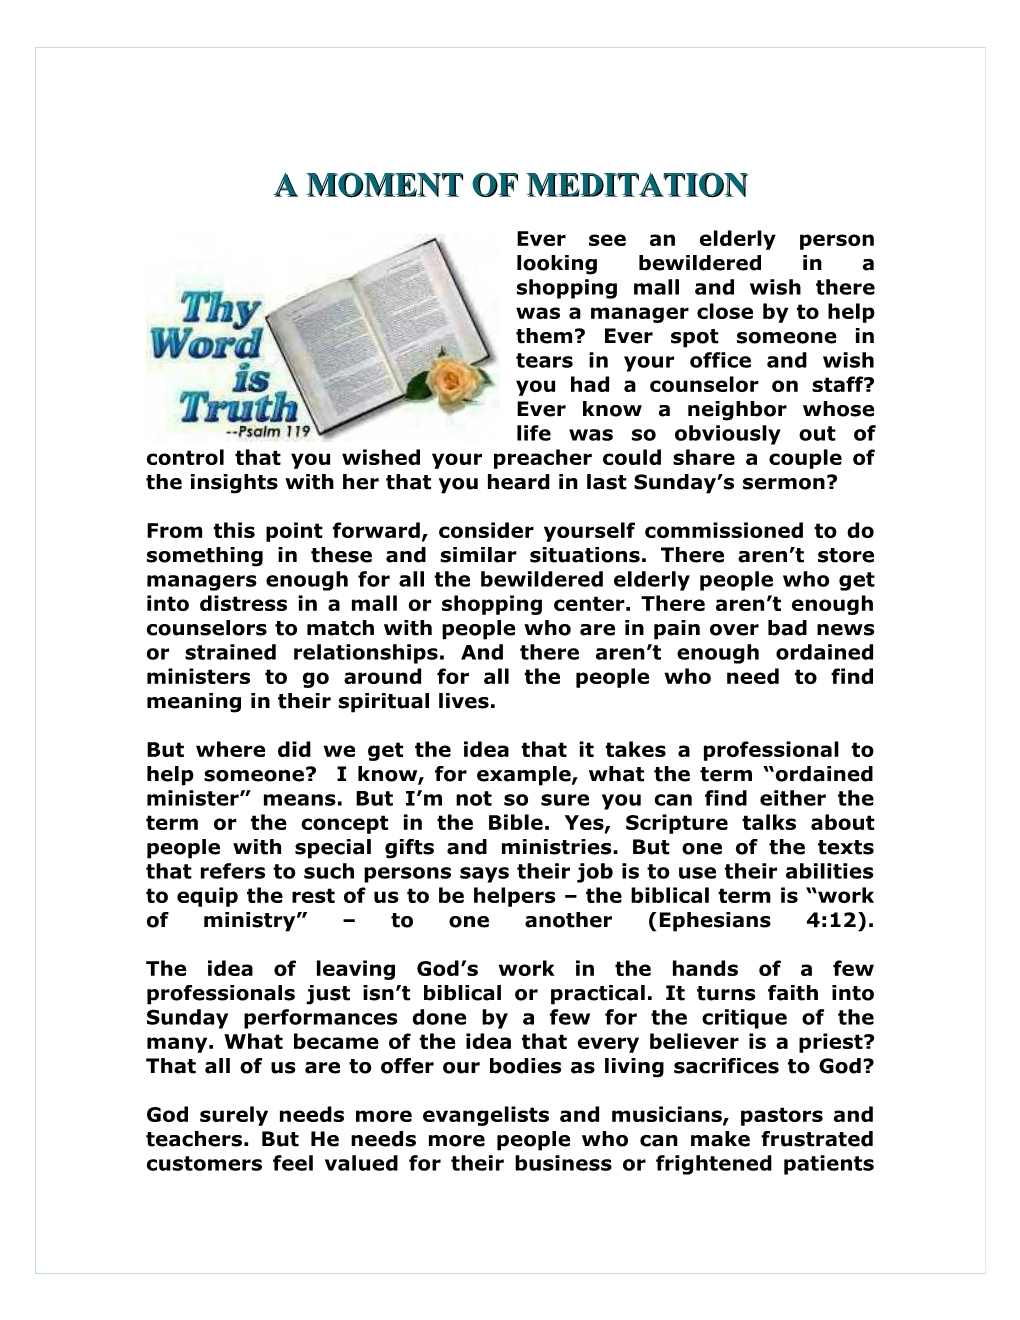 A Moment of Meditation s1